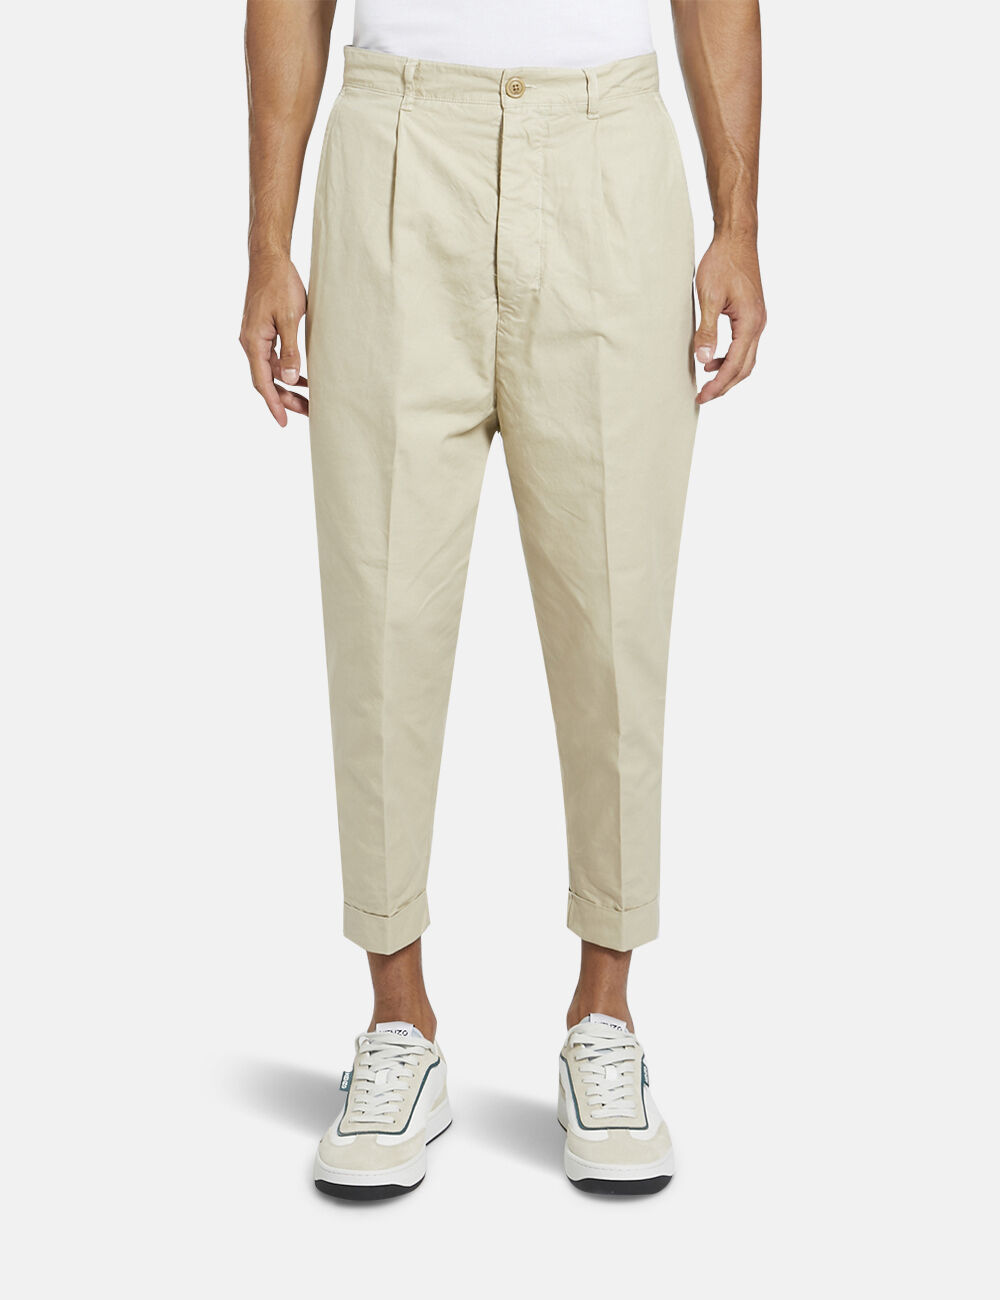 Ami Alexandre Mattiussi Oversized Carrot Fit Trousers In Beige  ModeSens   Fitted trousers Chino pants men Brown casual pants